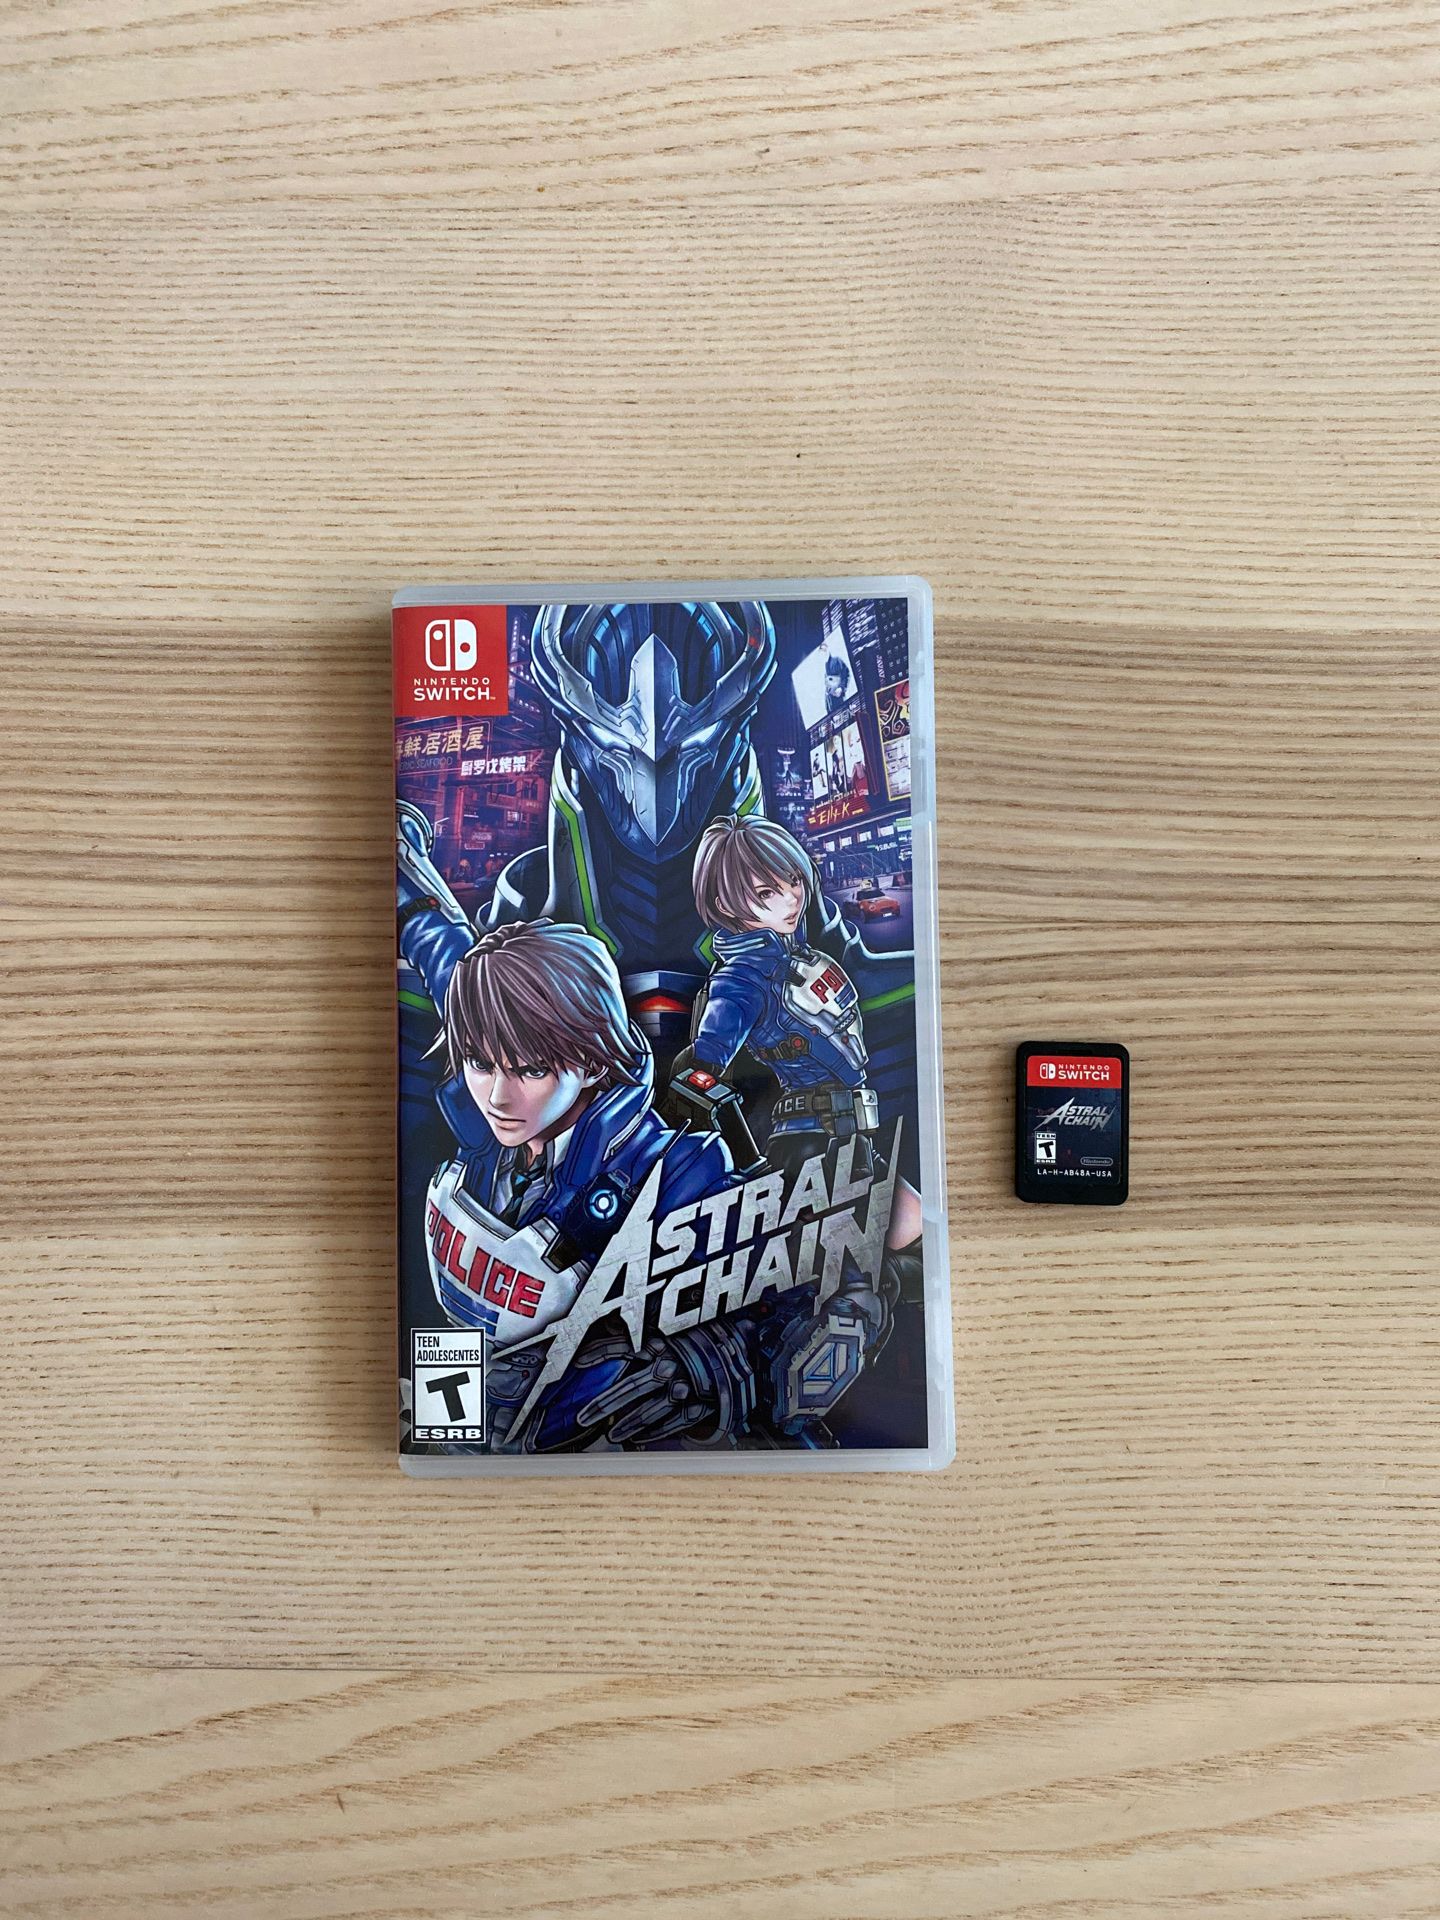 Astral Chain Nintendo Switch.